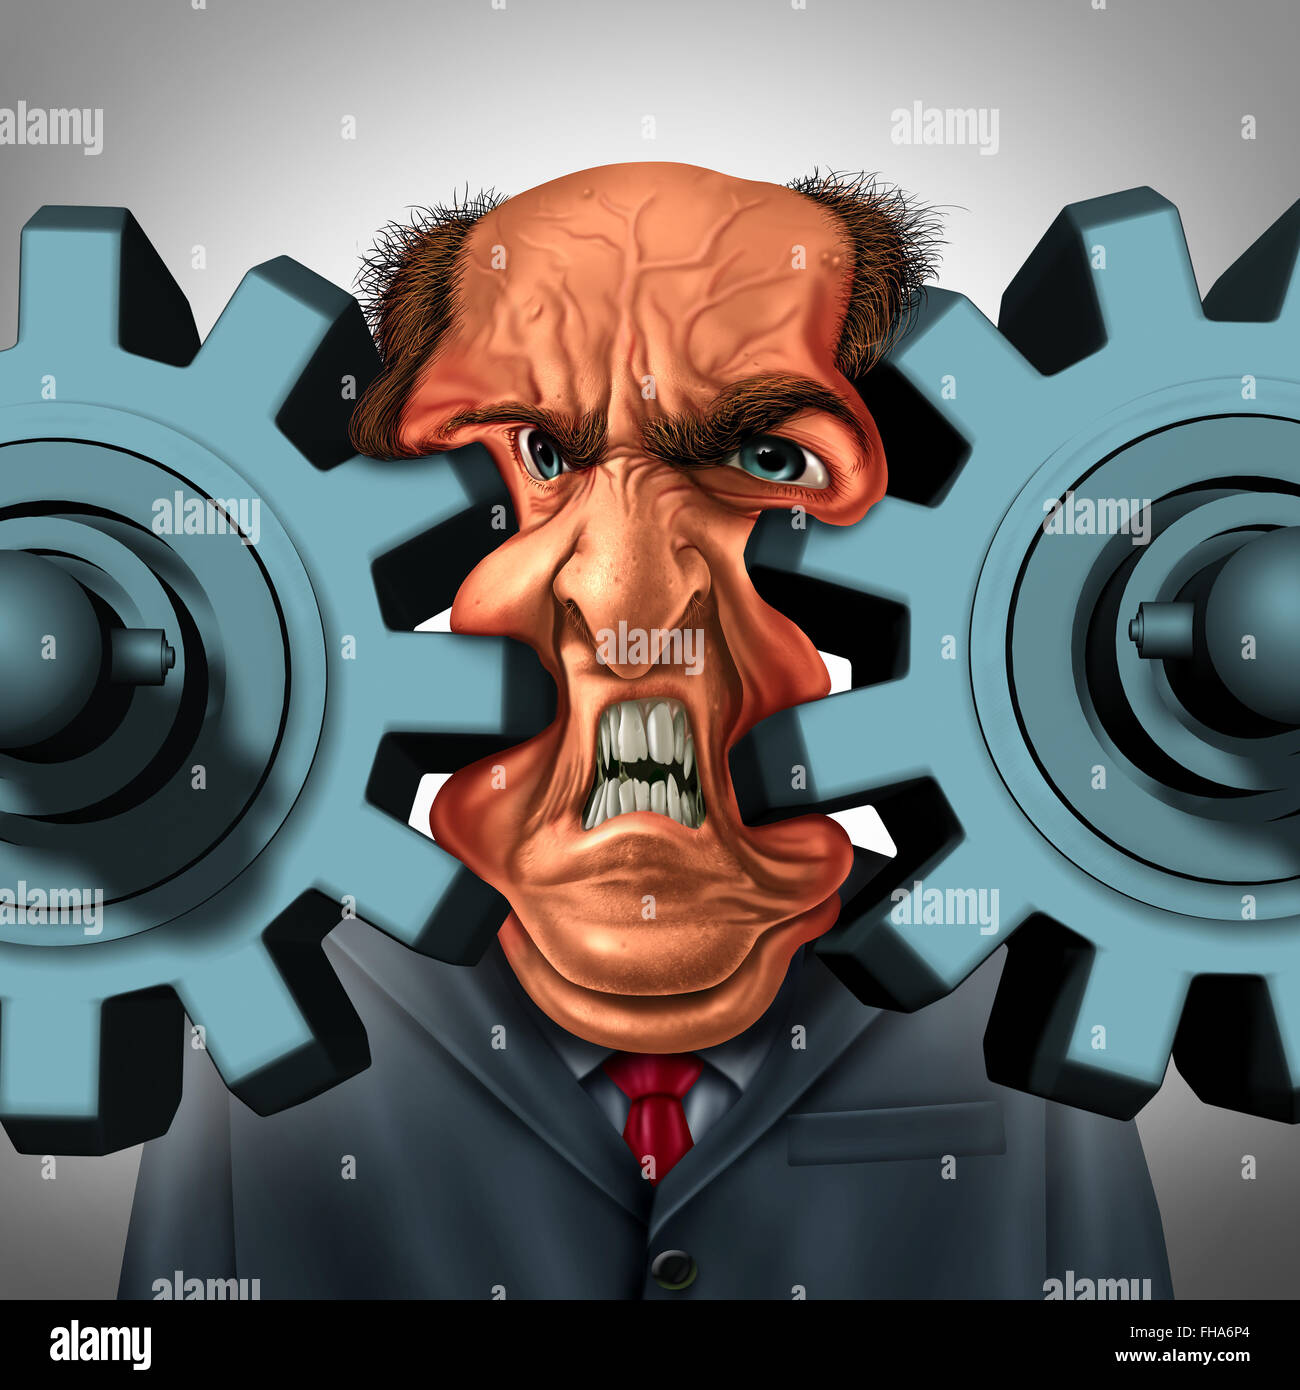 Business squeeze and company trouble concept as a businessman or boss stuck between two gears or cog wheels resulting in a painful technology and management problem as a corporate pressure symbol. Stock Photo